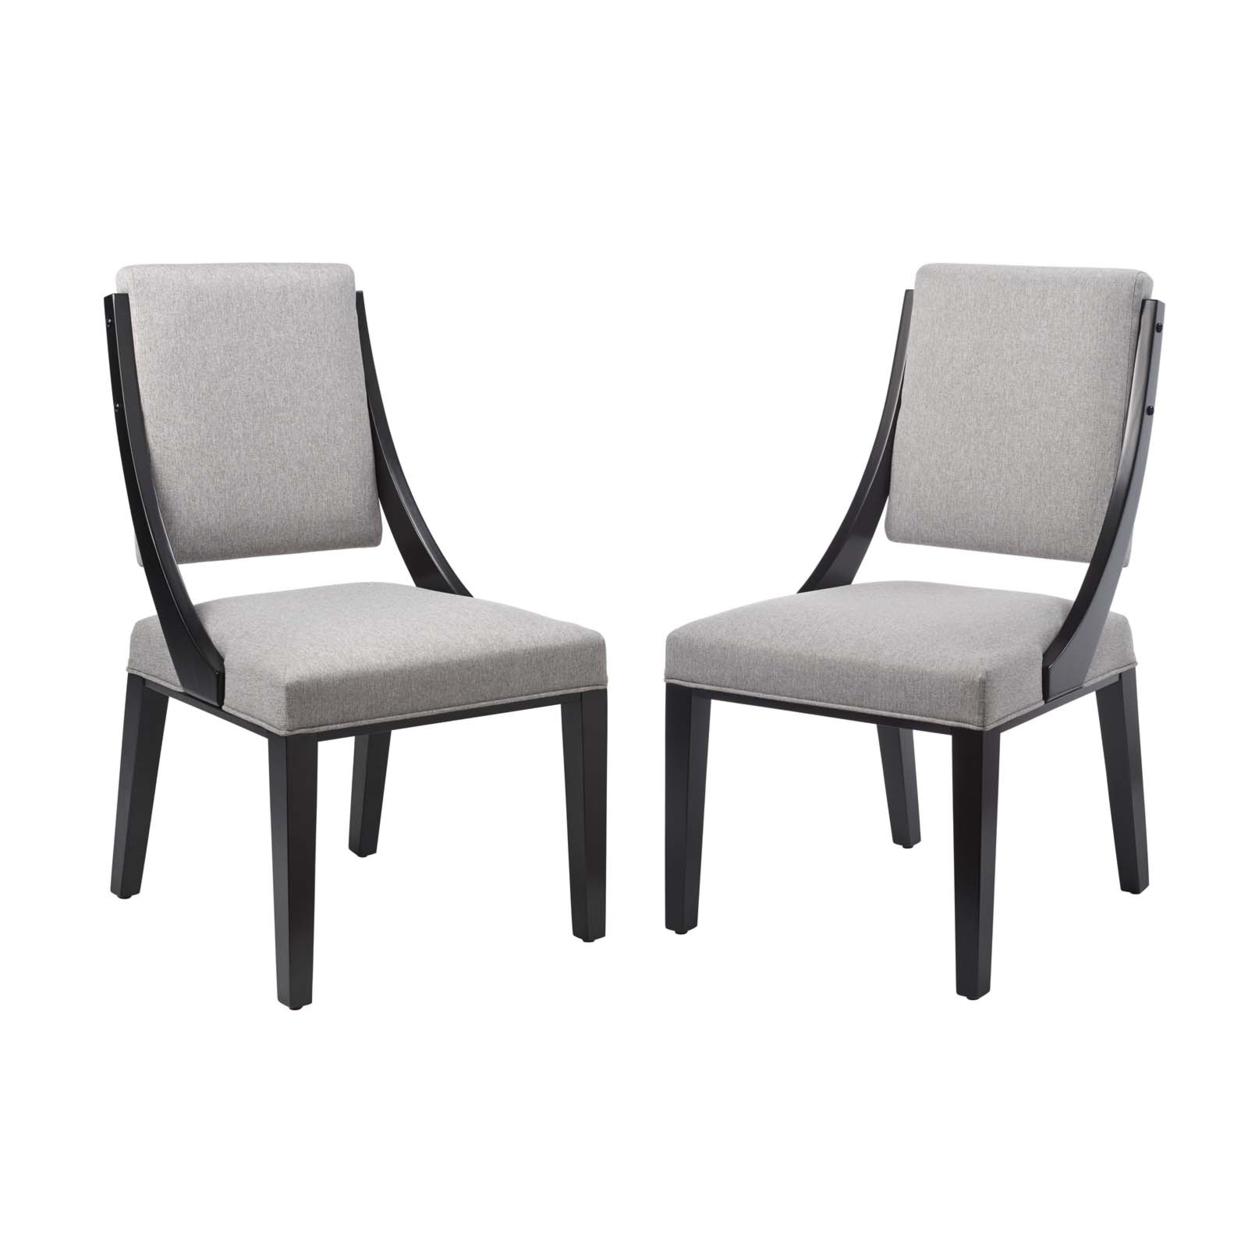 Cambridge Upholstered Fabric Dining Chairs - Set Of 2, Light Gray